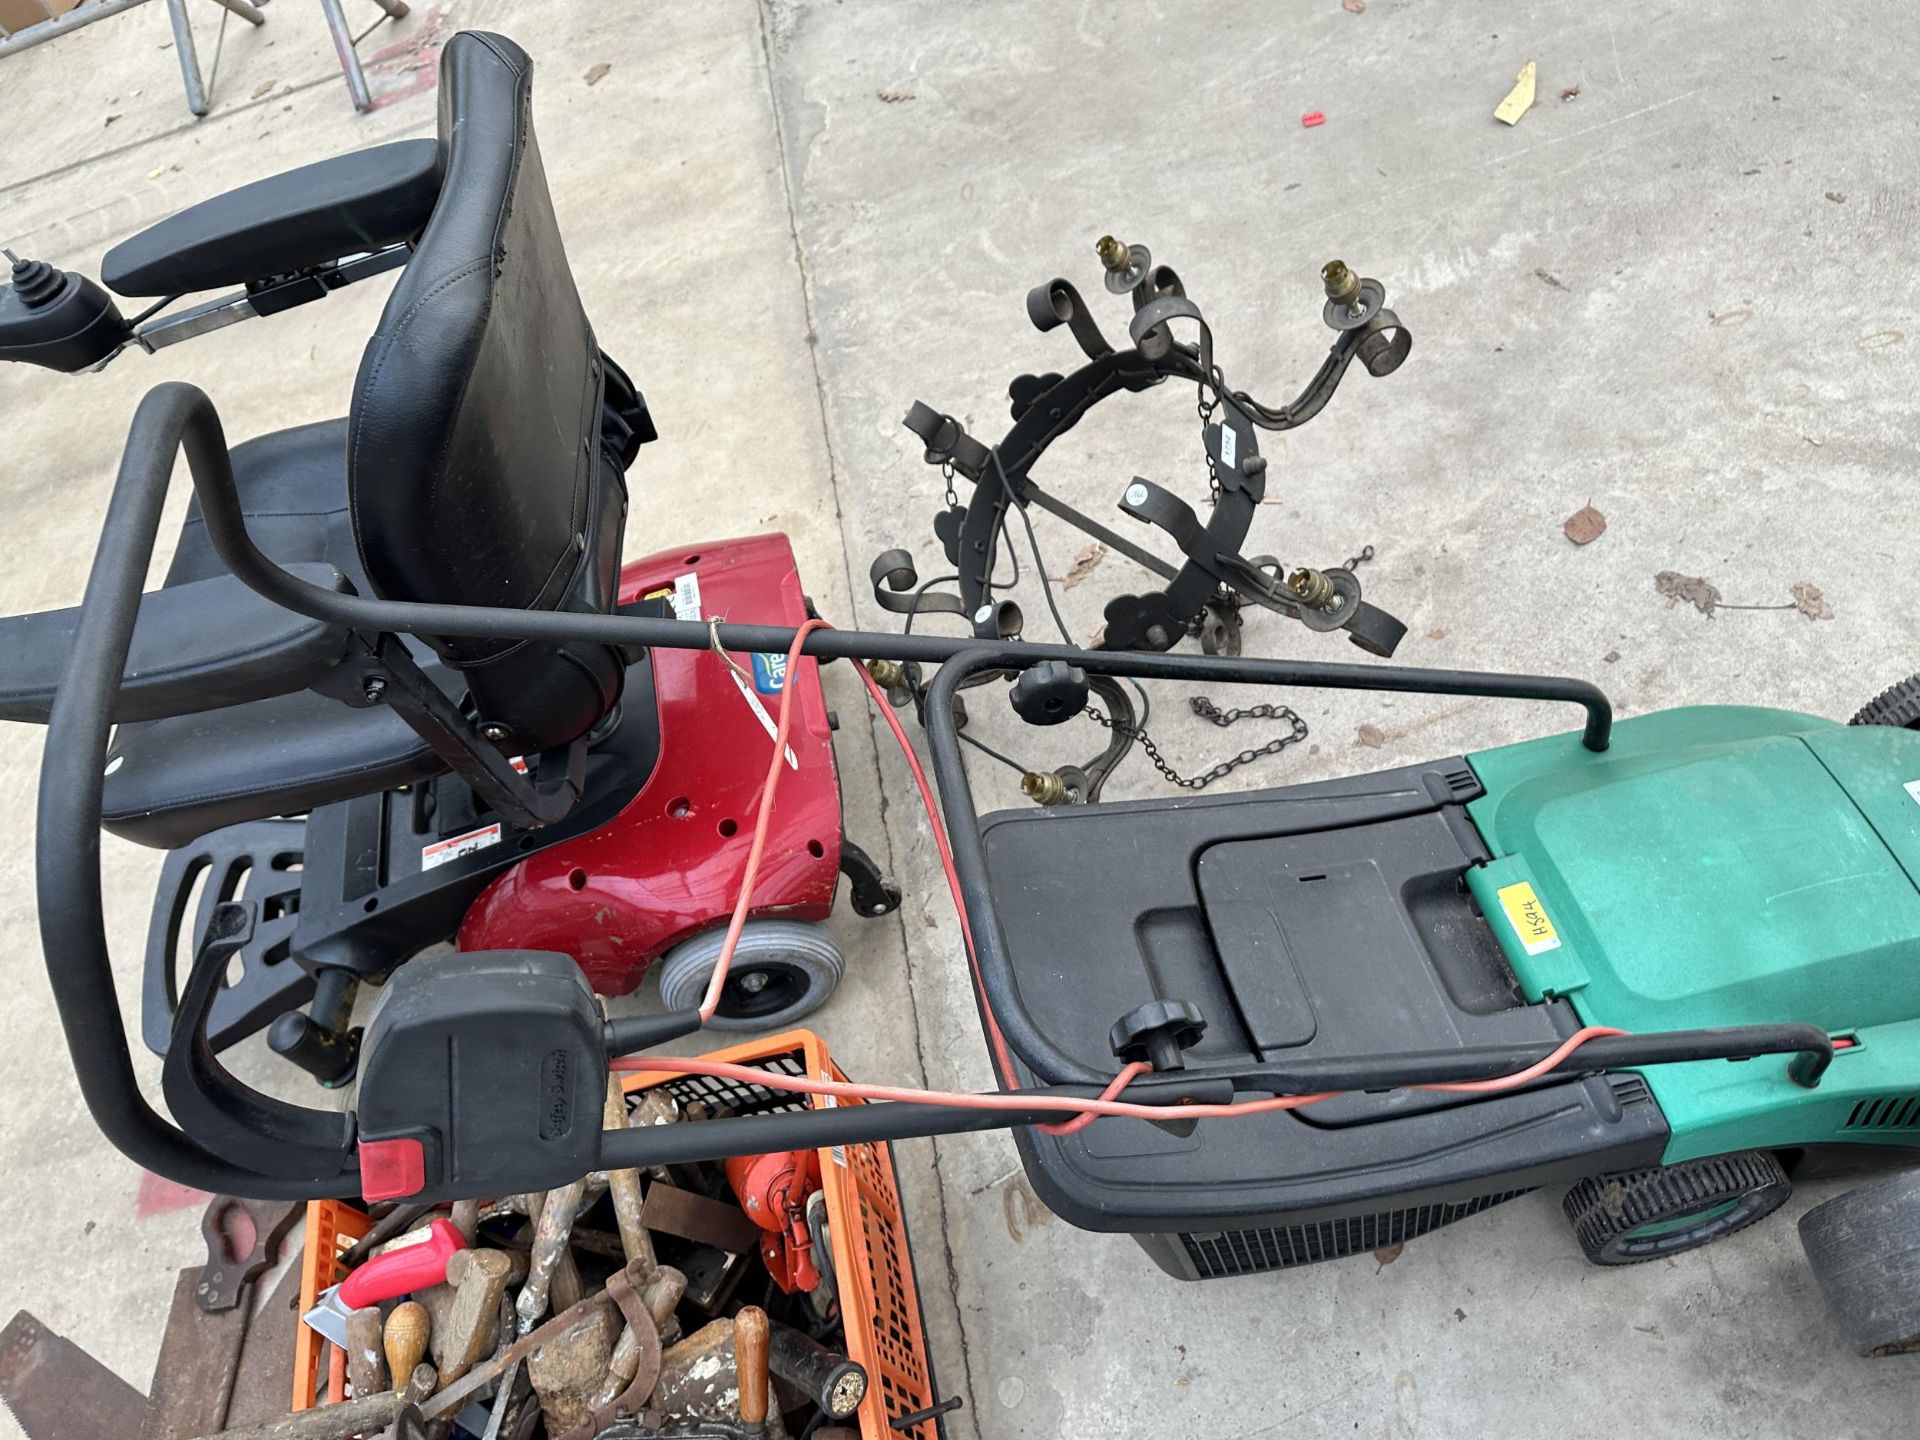 AN ELECTRIC QUALCAST COBRA LAWN MOWER WITH GRASS BOX - Image 3 of 3